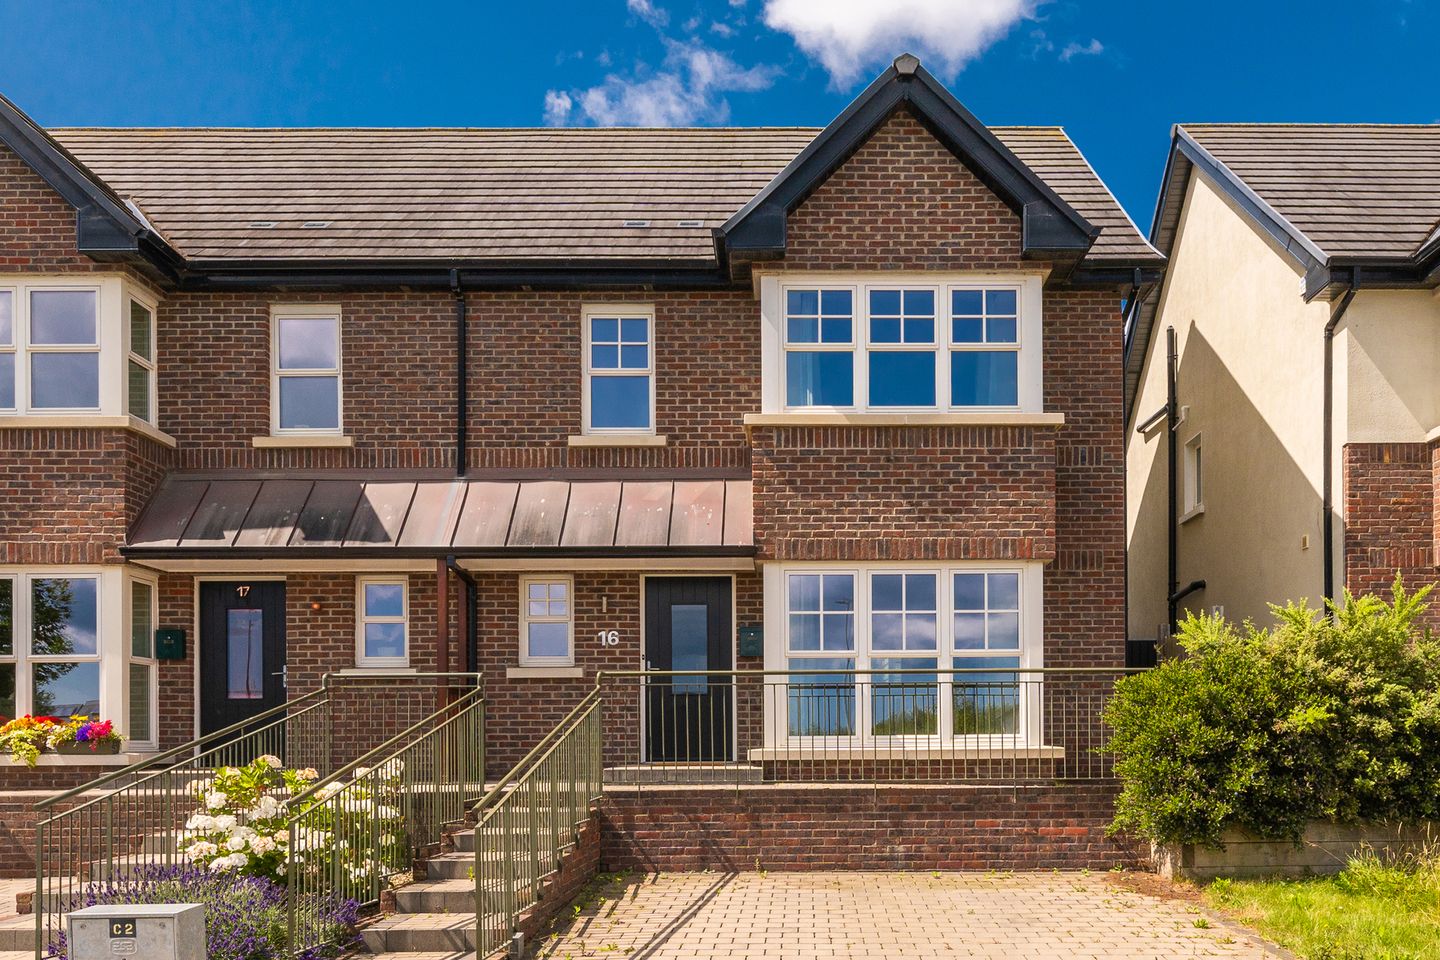 16 Seagreen Drive, Greystones, Co. Wicklow, A63YV56